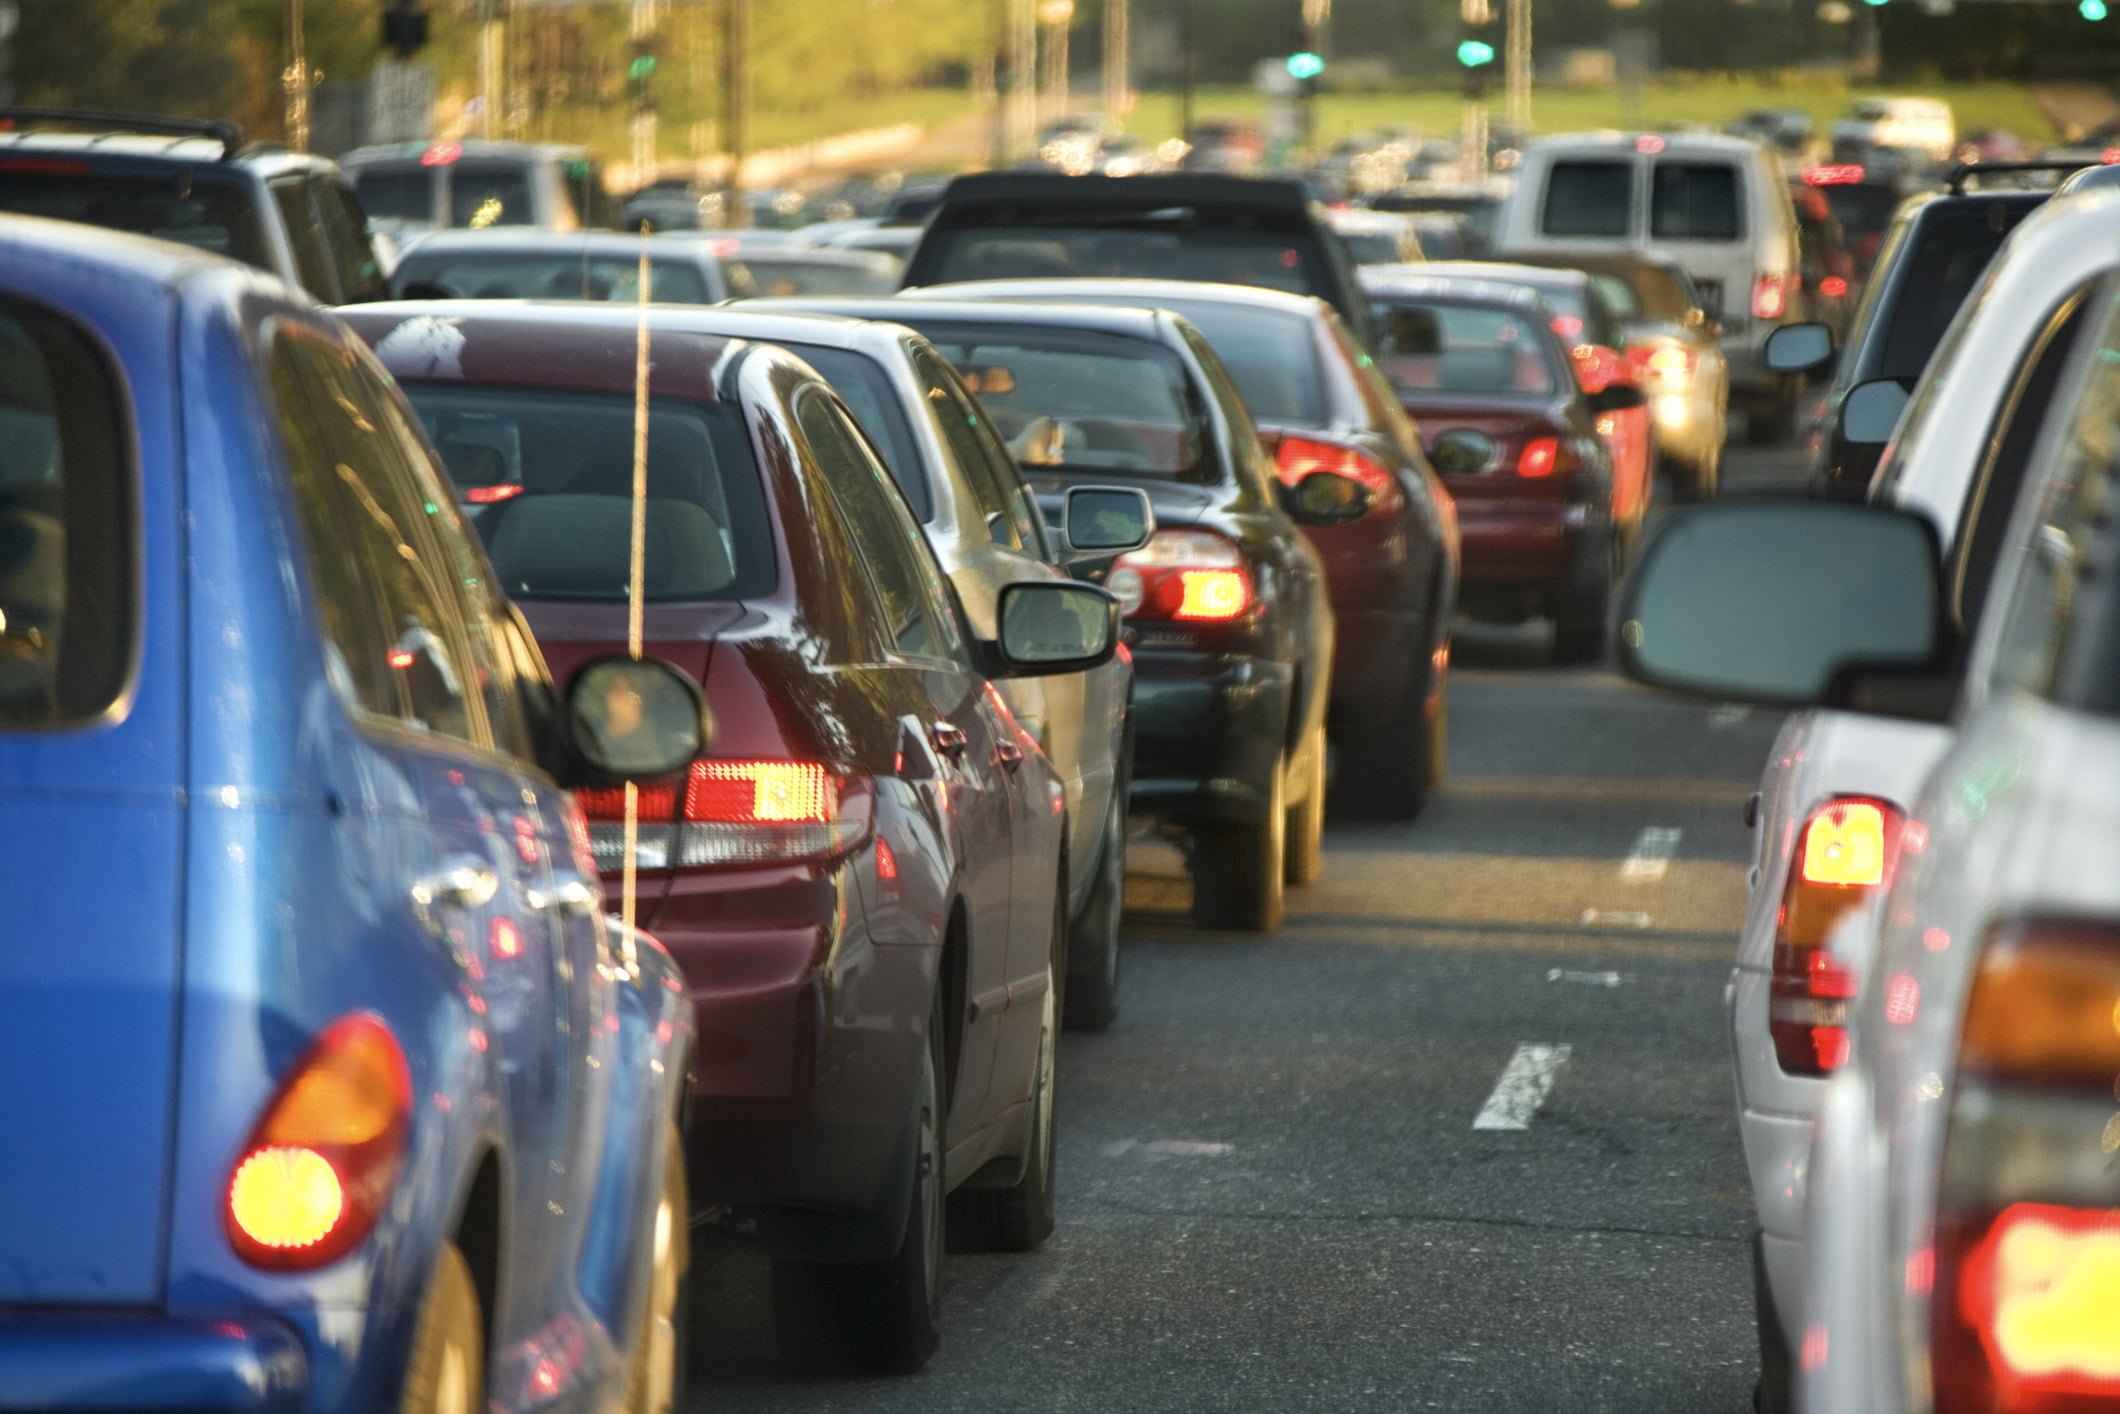 Motorists have said they find daily traffic jams even more stressful than going on a first date.